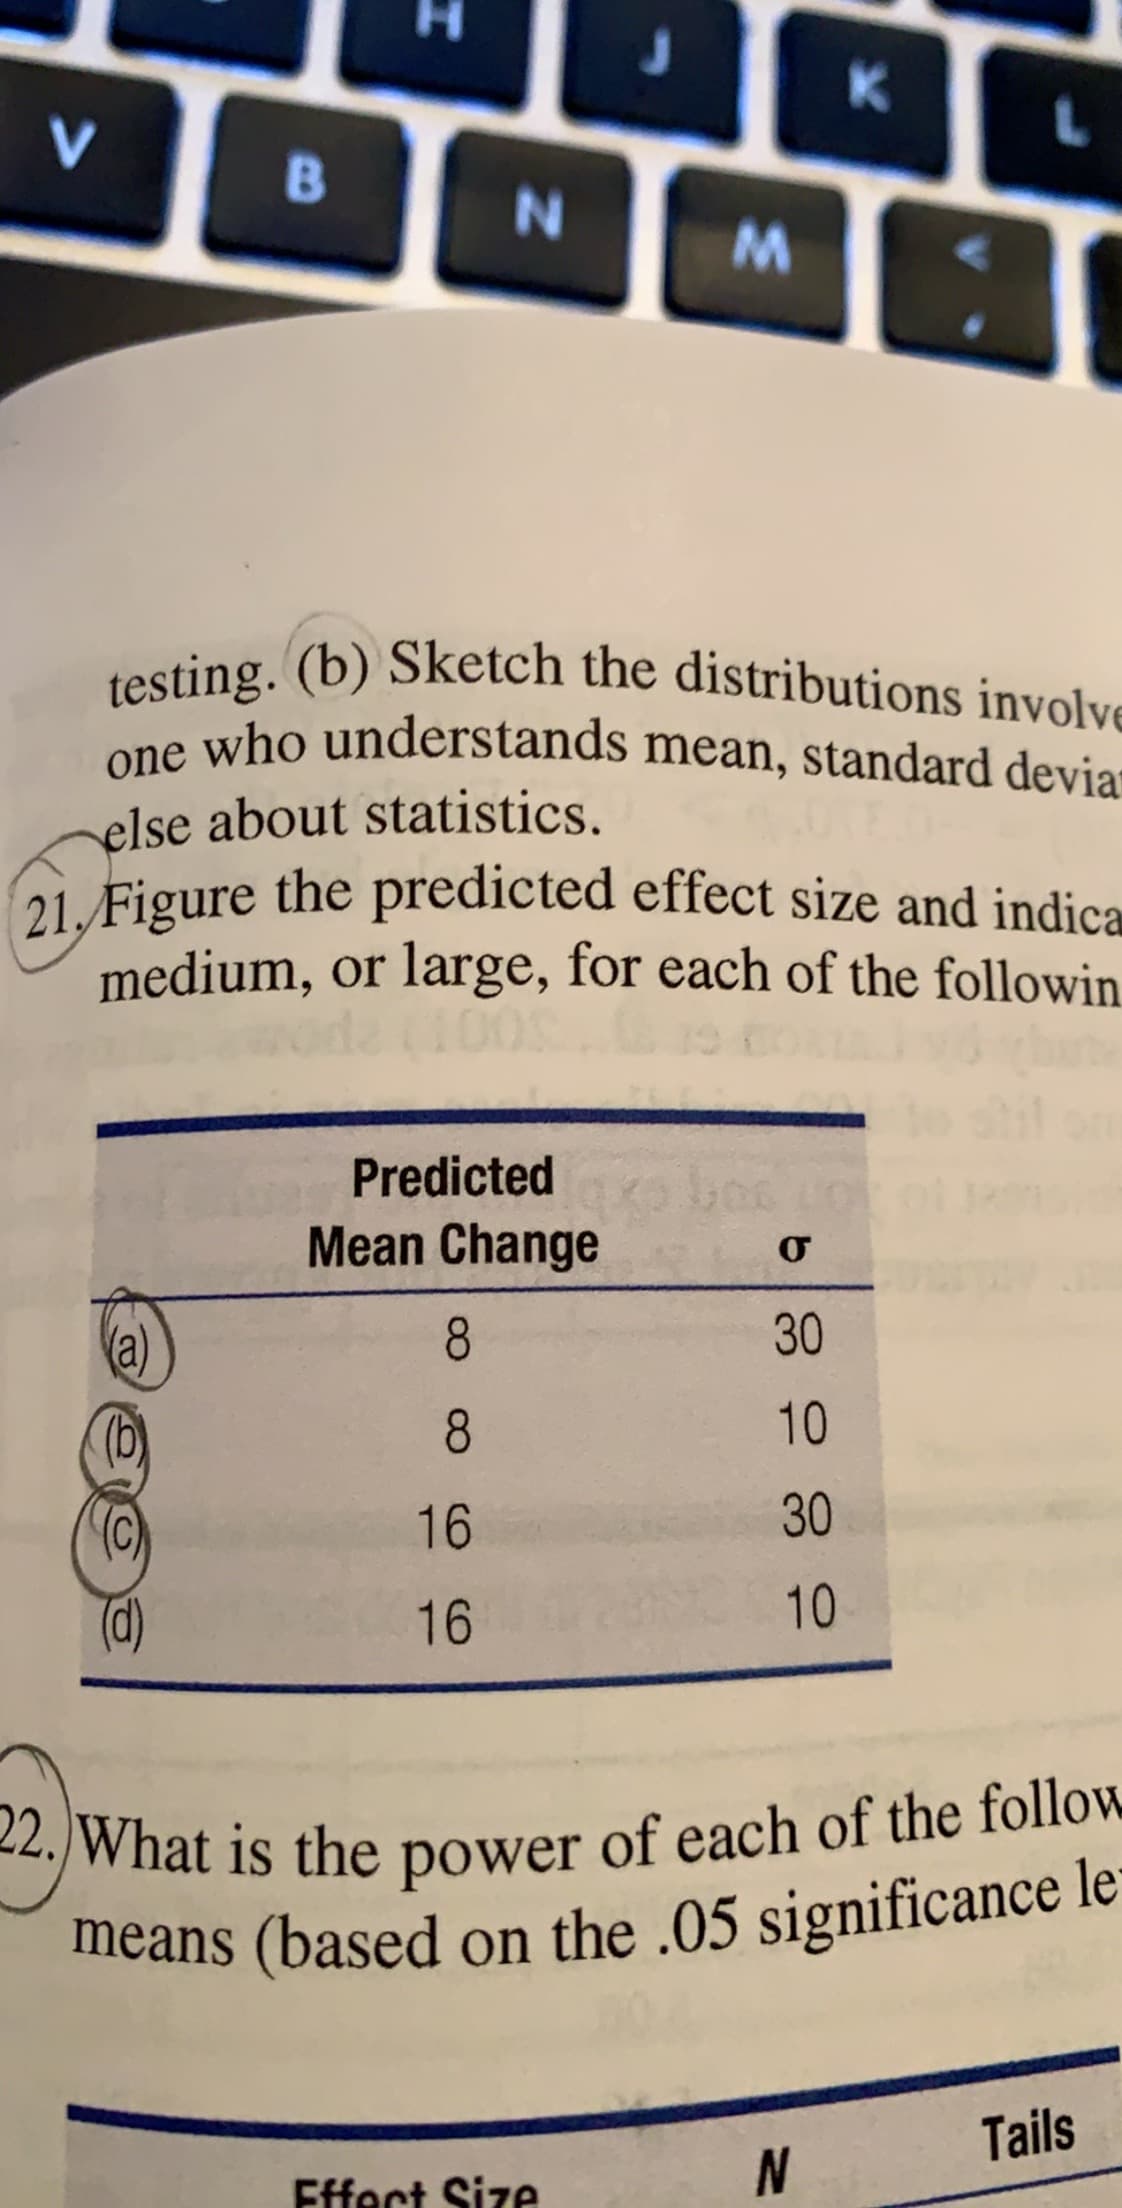 K
V
в
testing. (b) Sketch the distributions involve
one who understands mean, standard devia
else about statistics
21/Figure the predicted effect size and indica
medium, or large, for each of the followin
Predicted
Mean Change
о
30
8
10
(b)
C)
8
30
16
10
16
2. What is the power of each of the follow
means (based on the .05 significance le
Tails
Effect Size
N
